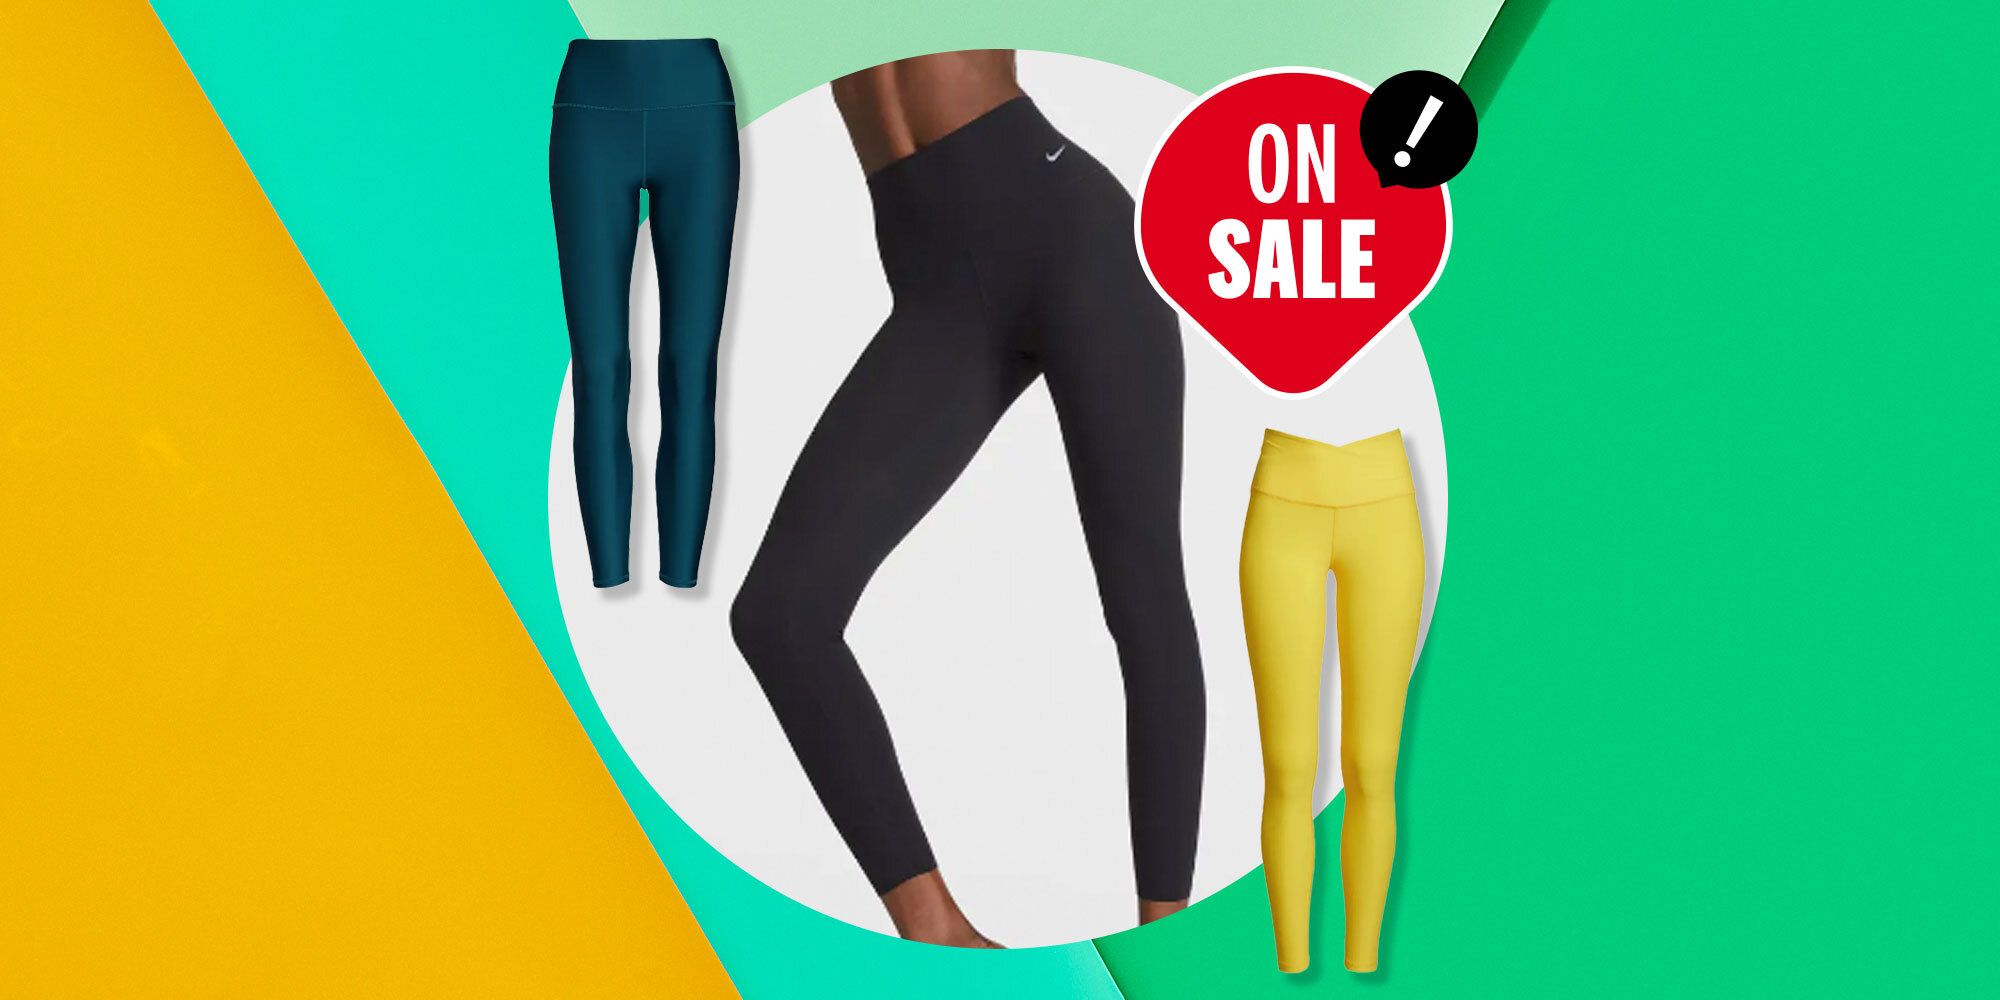 Family Dollar on X: Family Dollar's fall leggings collection has arrived!  Check out our newest styles and colors starting at $8!   / X